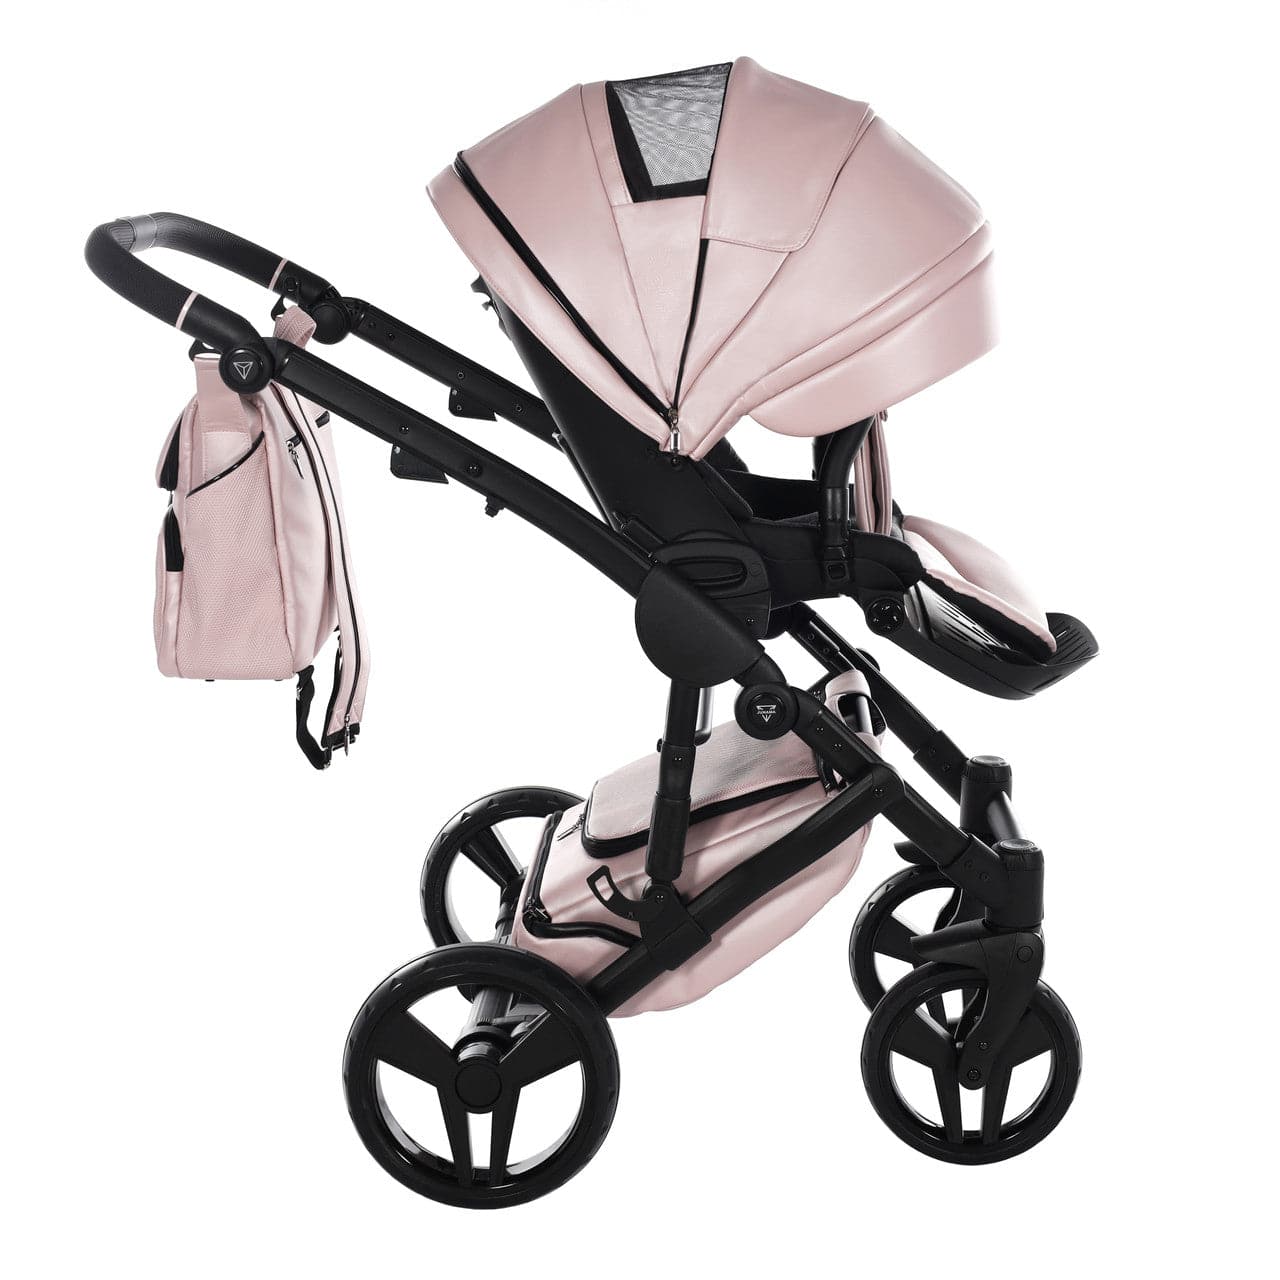 Junama S-Class 3 In 1 Travel System - Pink   